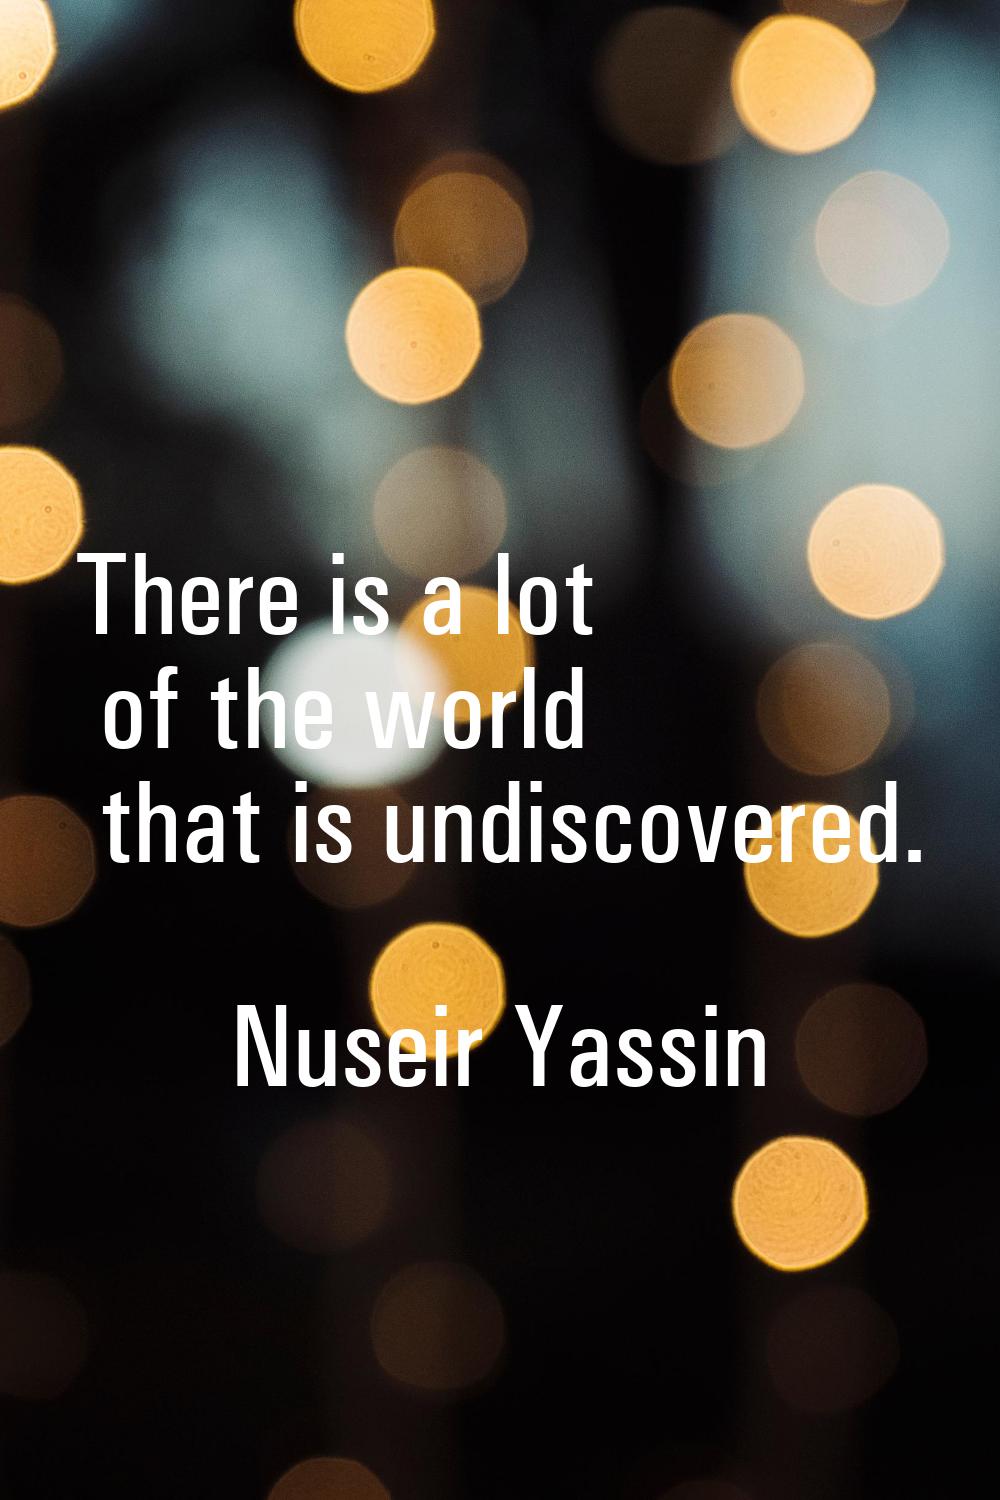 There is a lot of the world that is undiscovered.